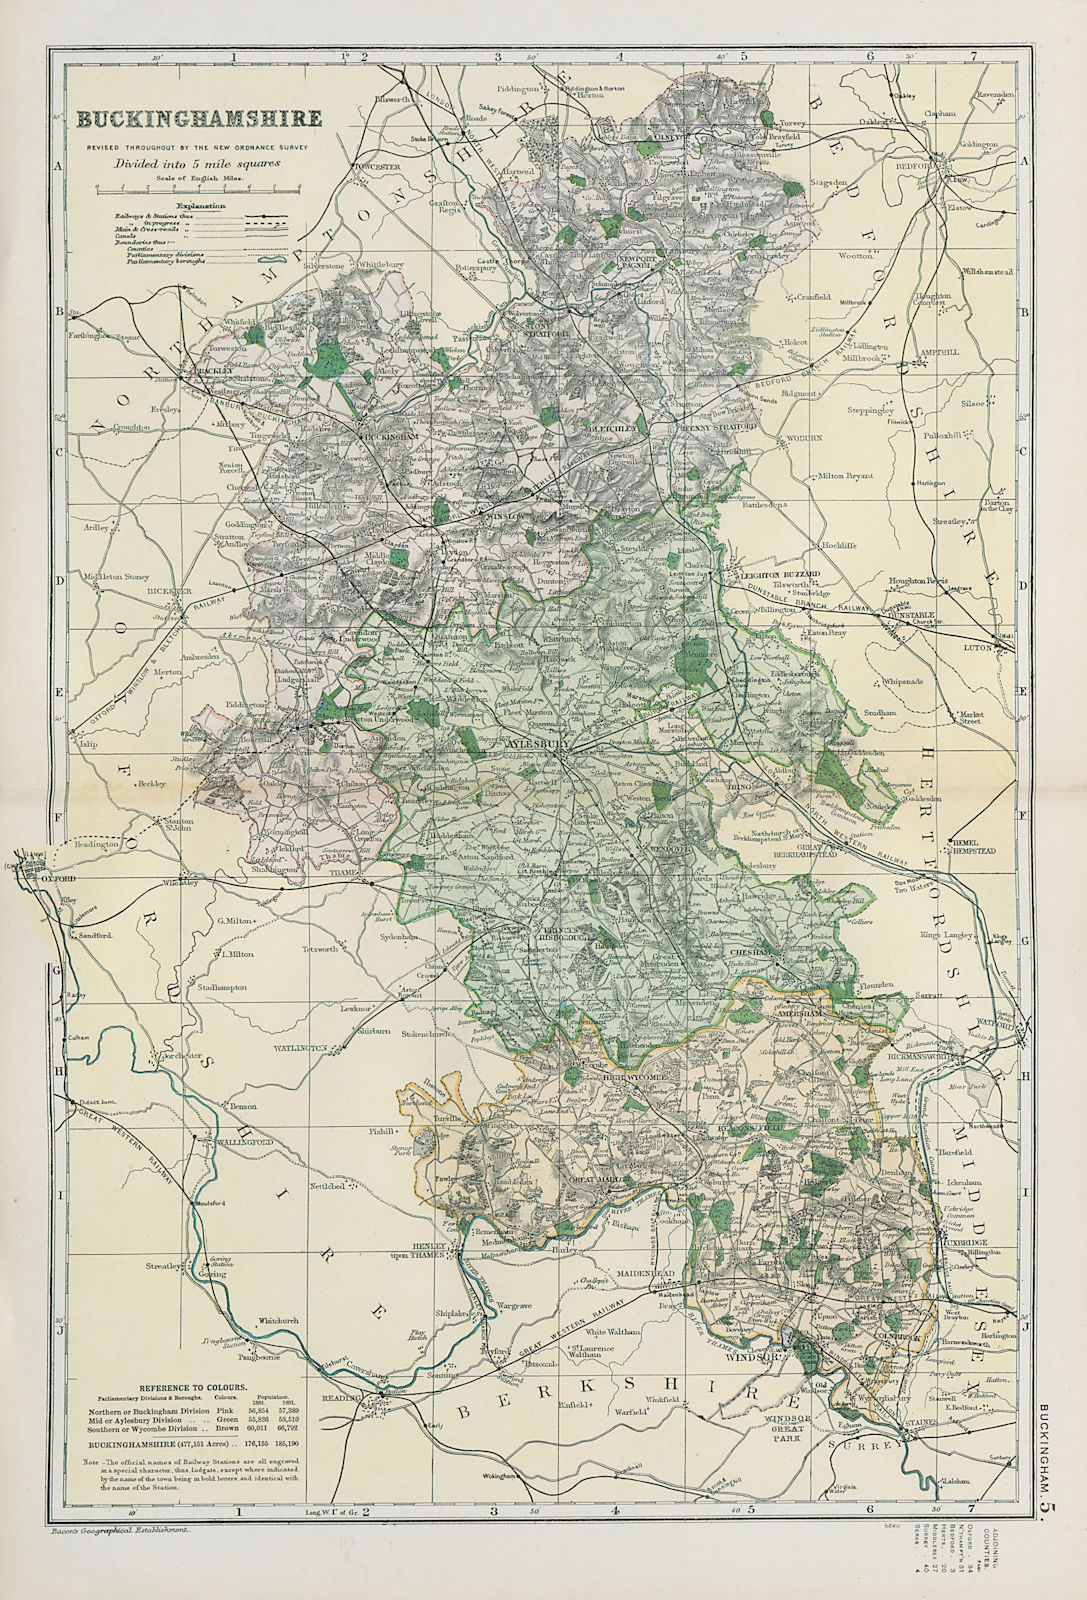 BUCKINGHAMSHIRE.Showing Parliamentary divisions,boroughs & parks.BACON 1900 map